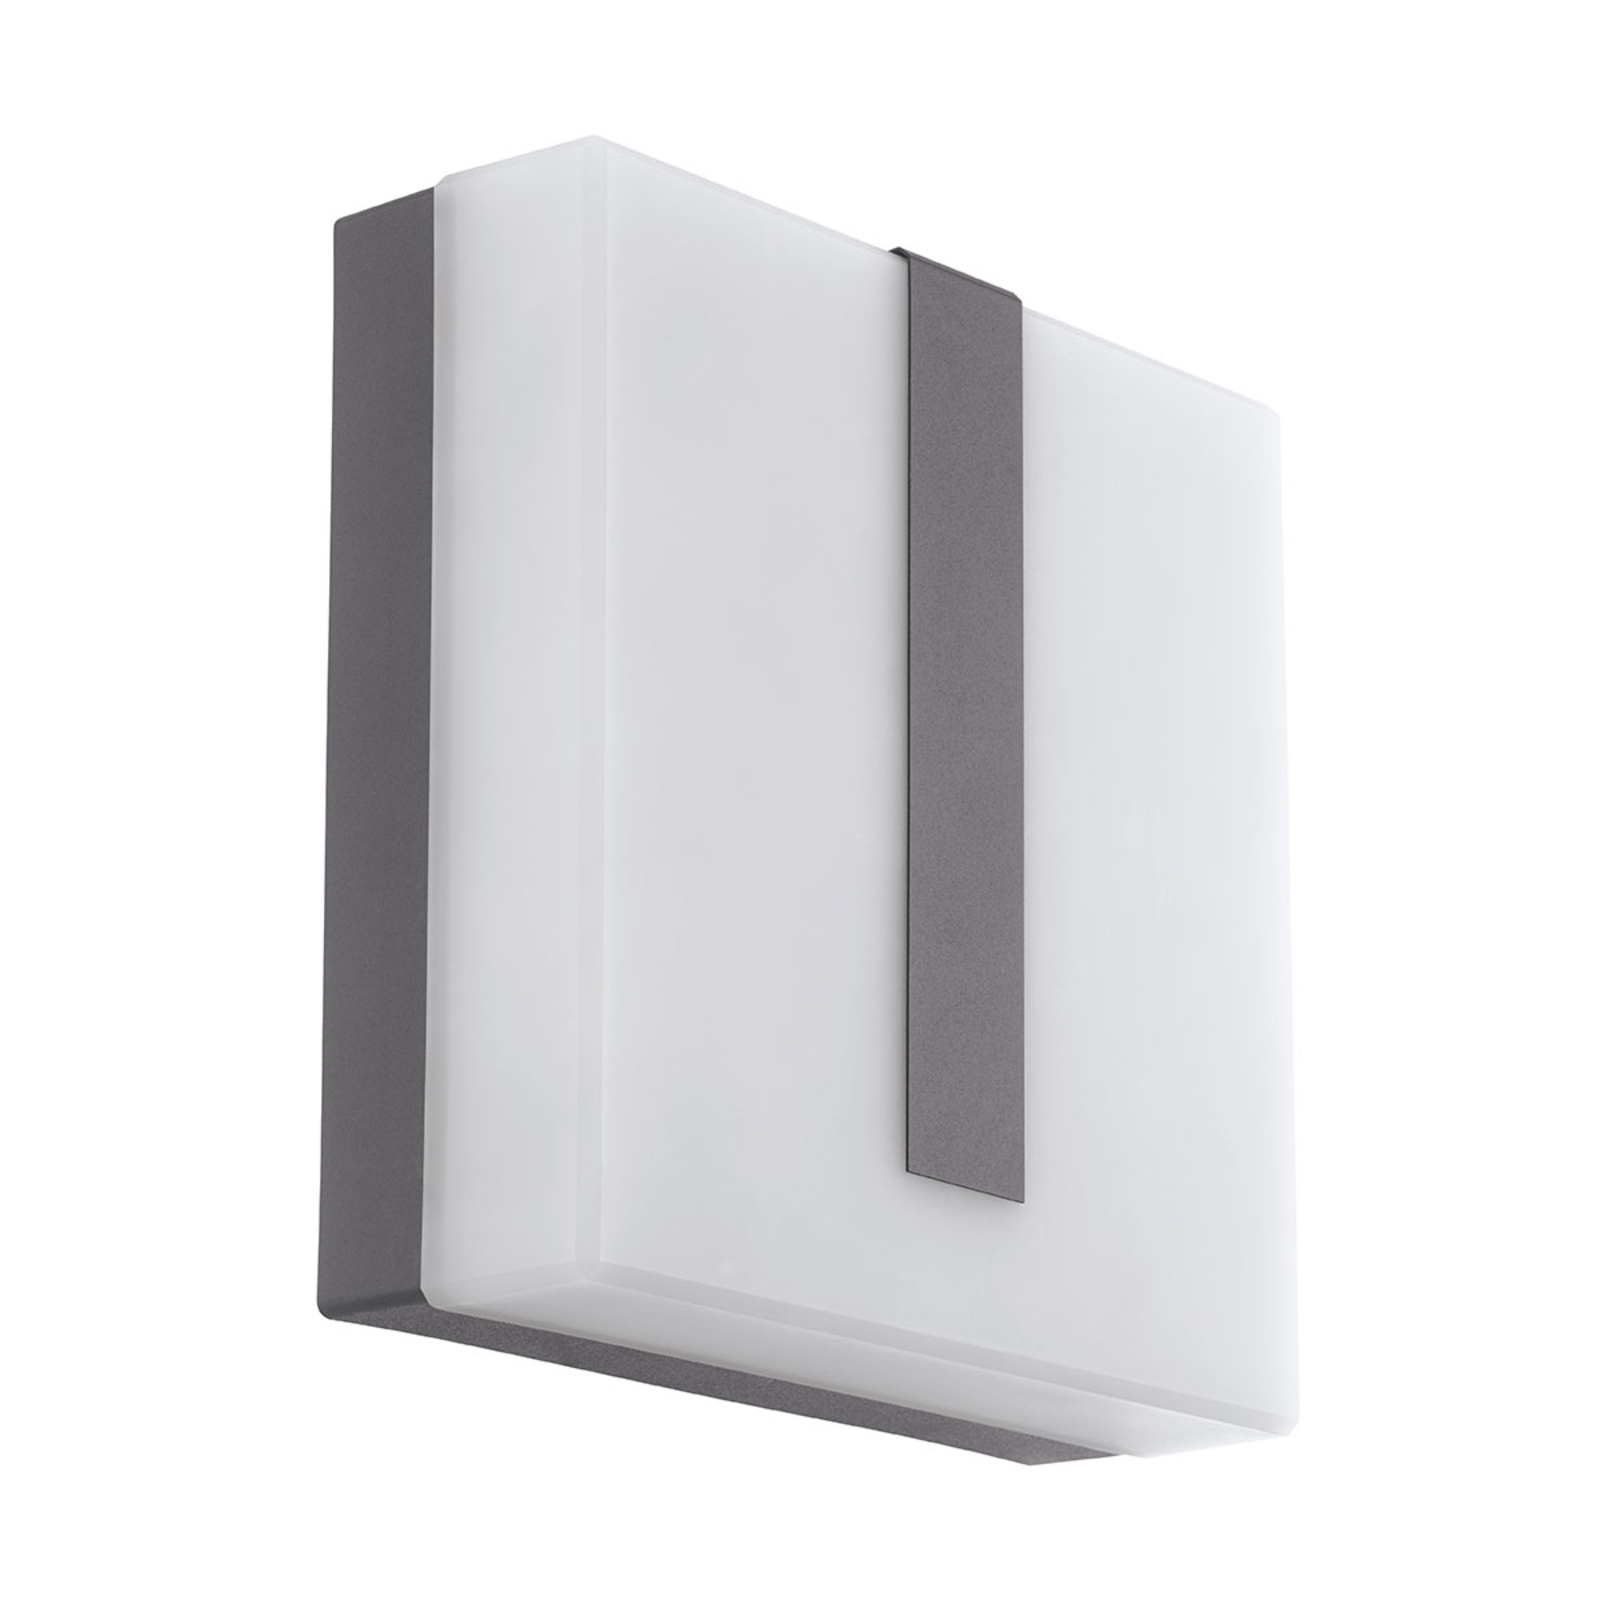 EGLO connect Torazza-C LED outdoor wall light